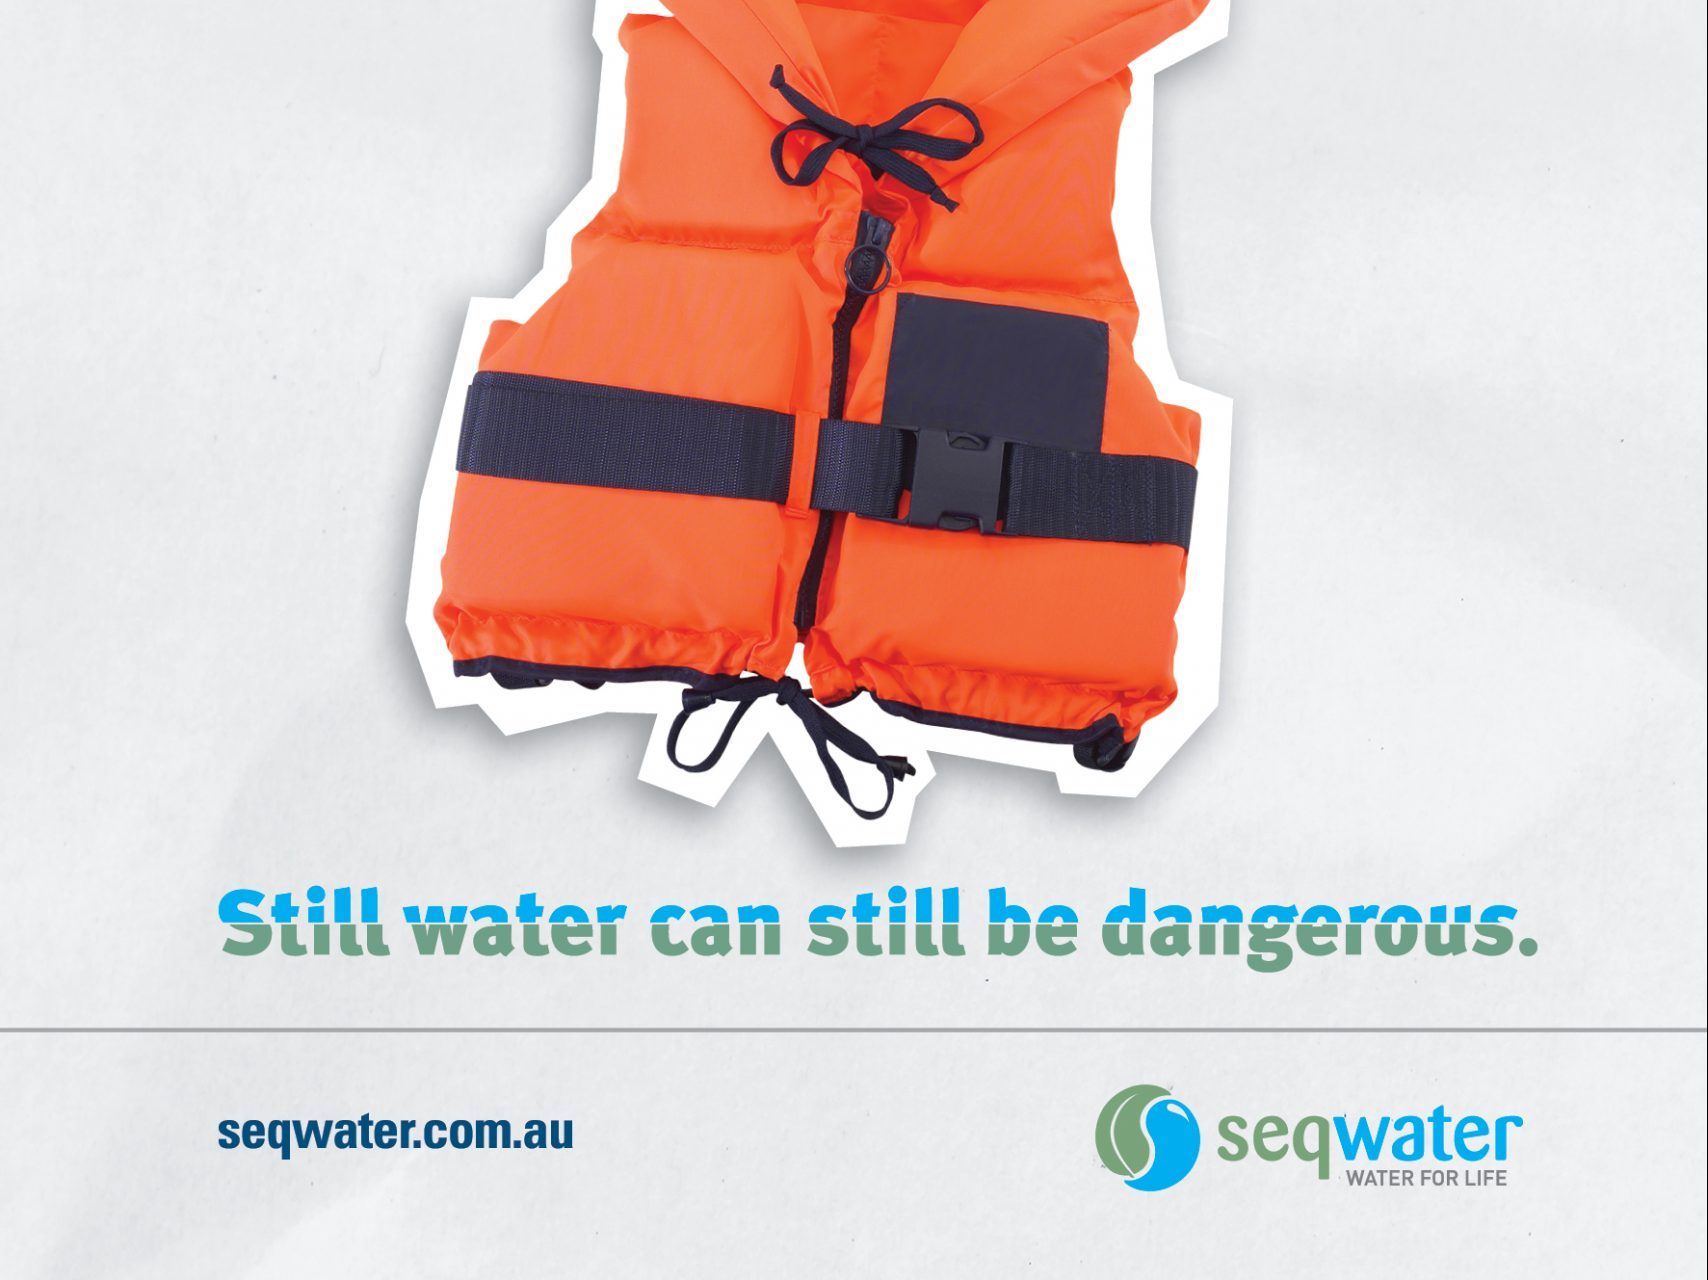 GrowthOps launches Seqwater safety campaign, 'Still water can still be dangerous', for third year running - MuMbrella